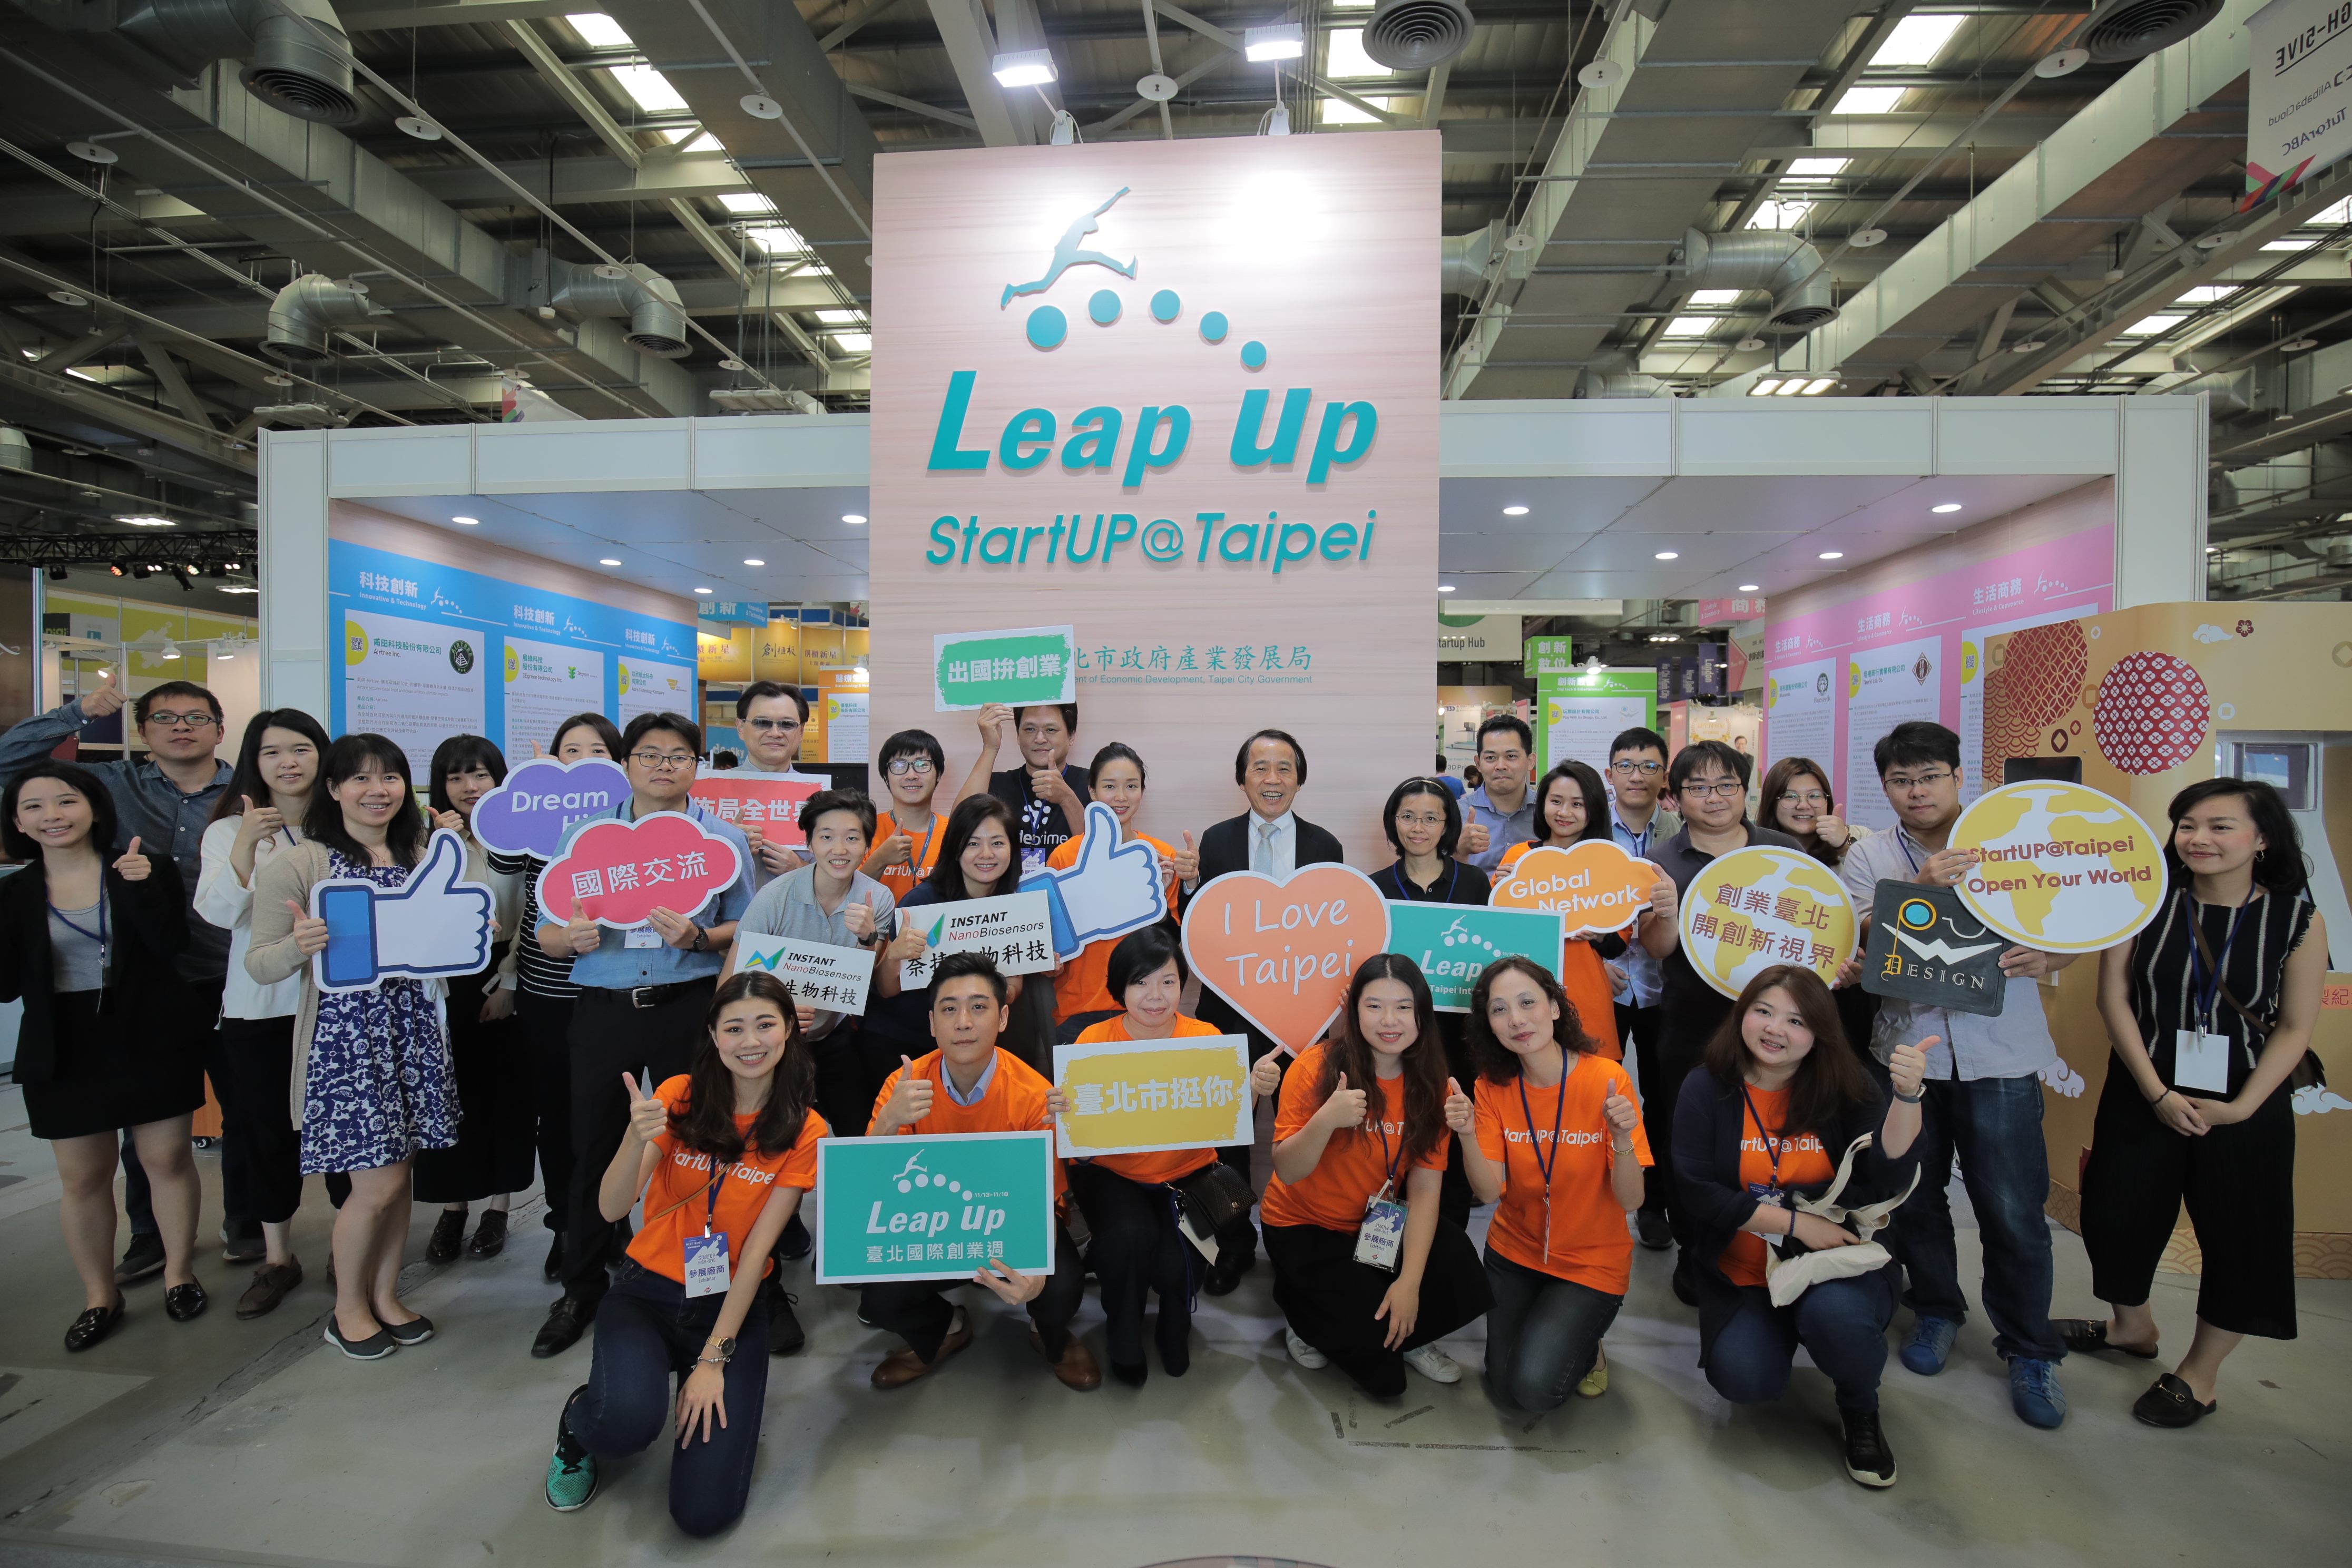 2018 Meet Taipei Startup Pavilion features displays by 40 startup teams/ Data source: Department of Economic Development, Taipei City Government